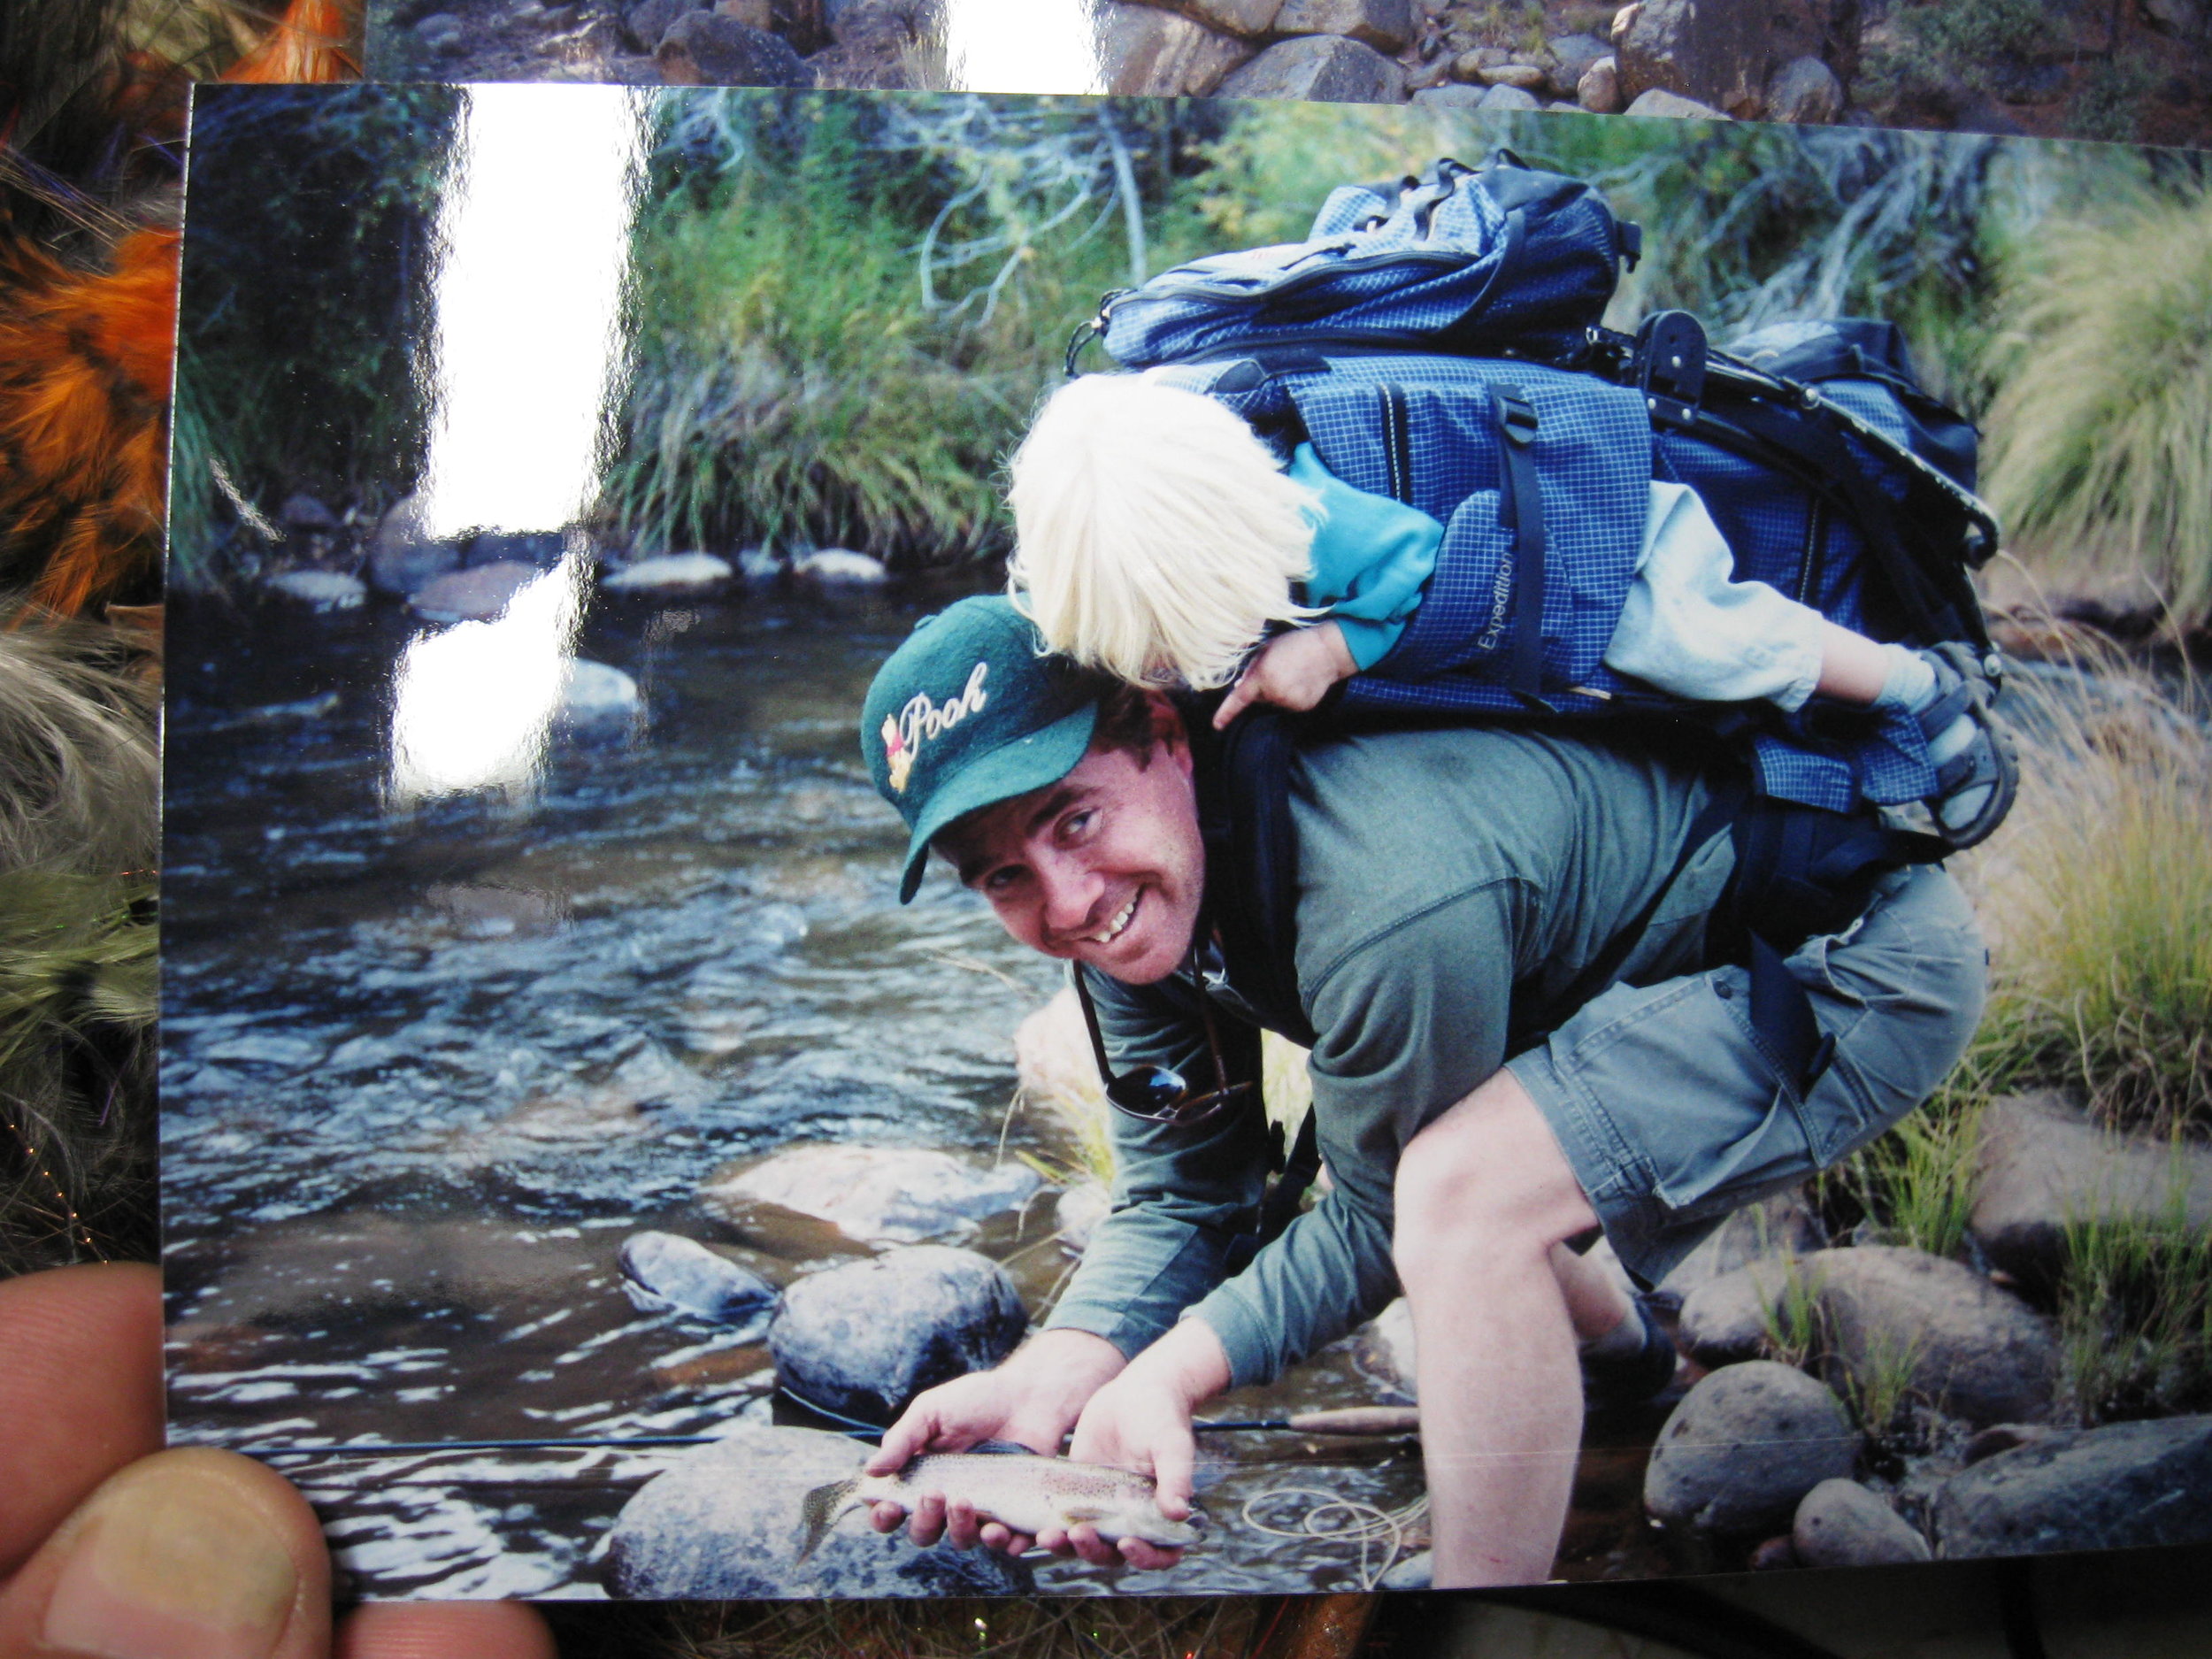  My niece Savannah with her dad on the South Fork of the Kern when she was only 2 years old. Savannah first joined us for fishing hikes when she was just 6 months. She always enjoyed touching (petting) the fish with her finger when she was younger be